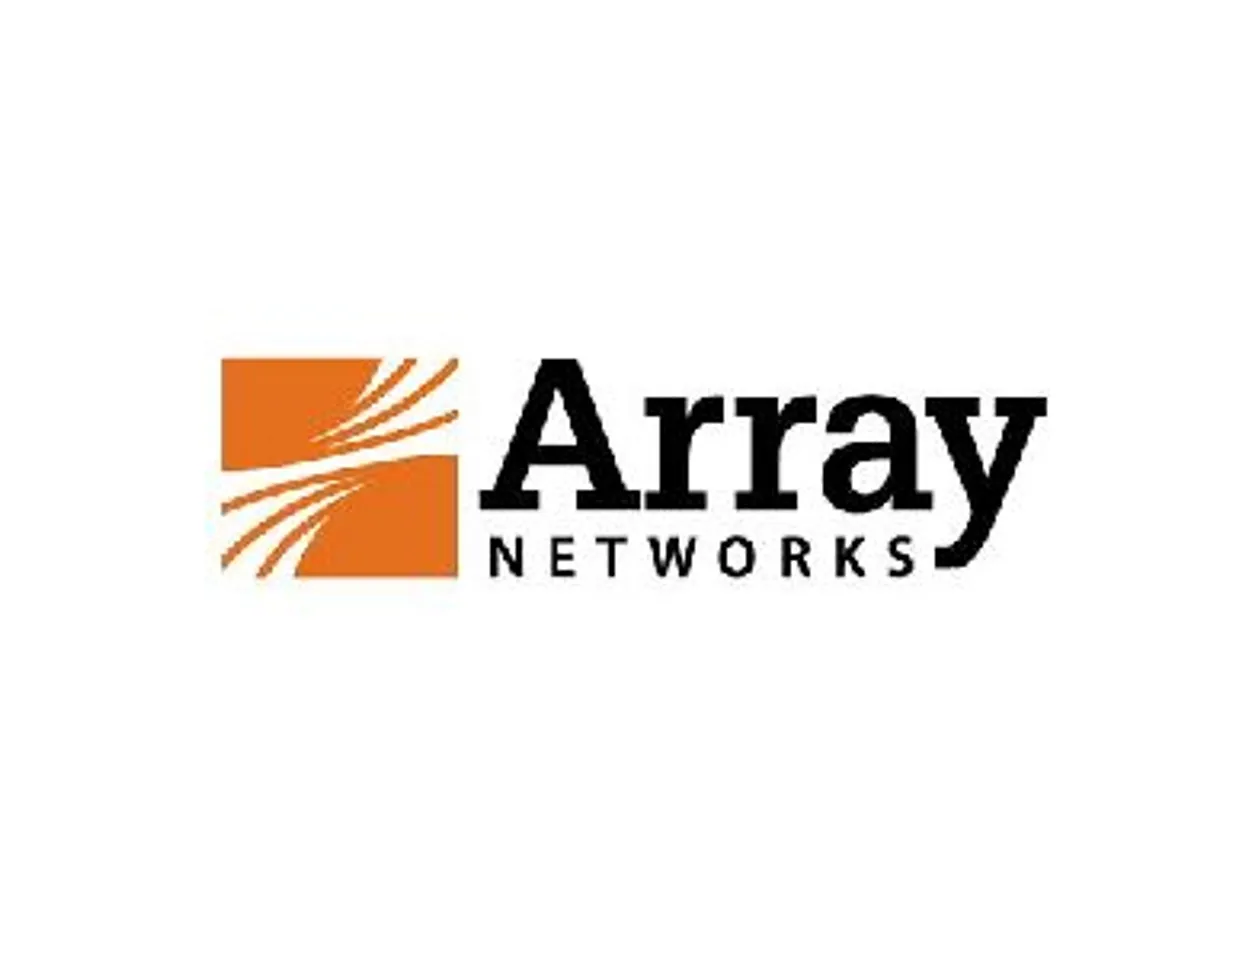 Array networks